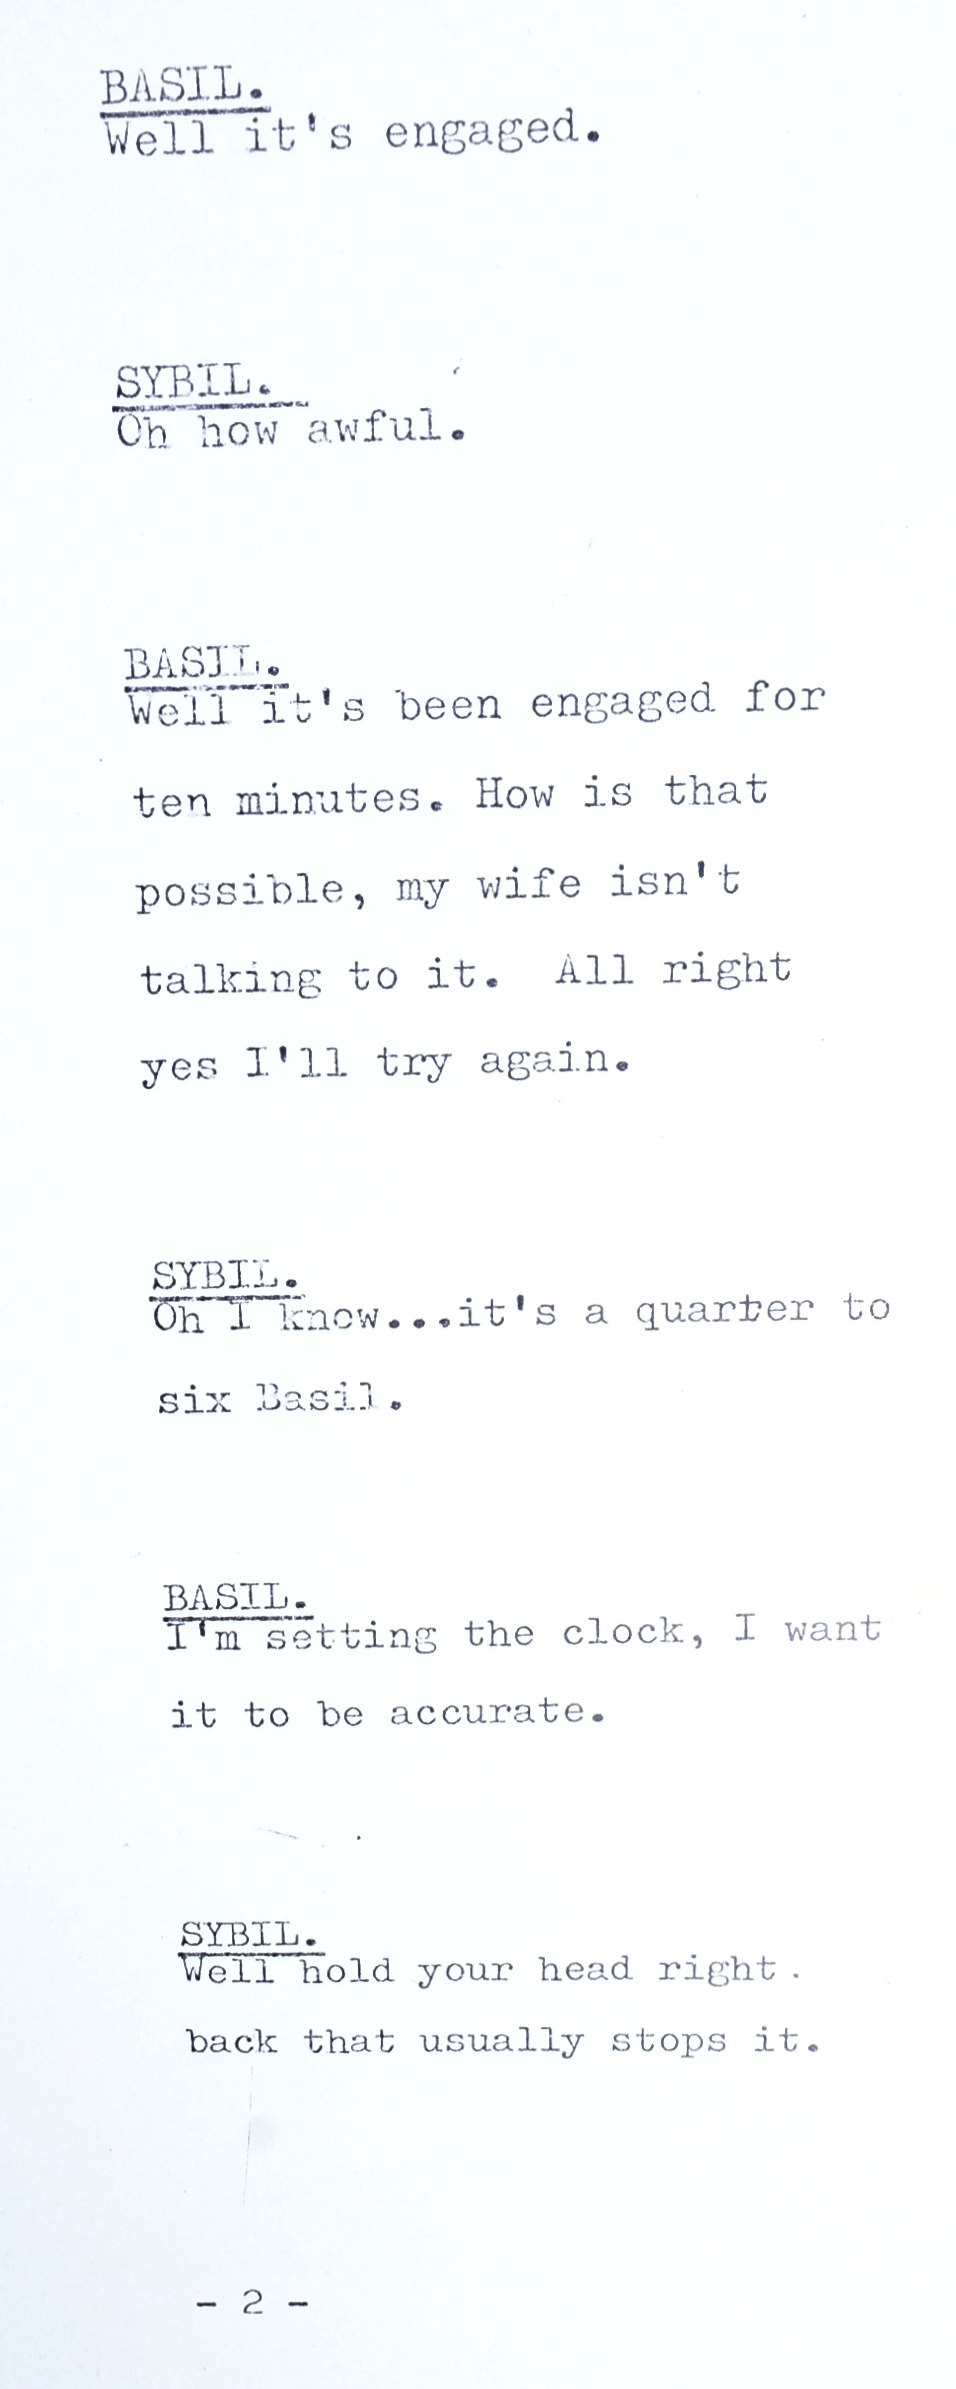 FAWLTY TOWERS (BBC SITCOM) - ORIGINAL PRODUCTION SCRIPT - Image 4 of 5